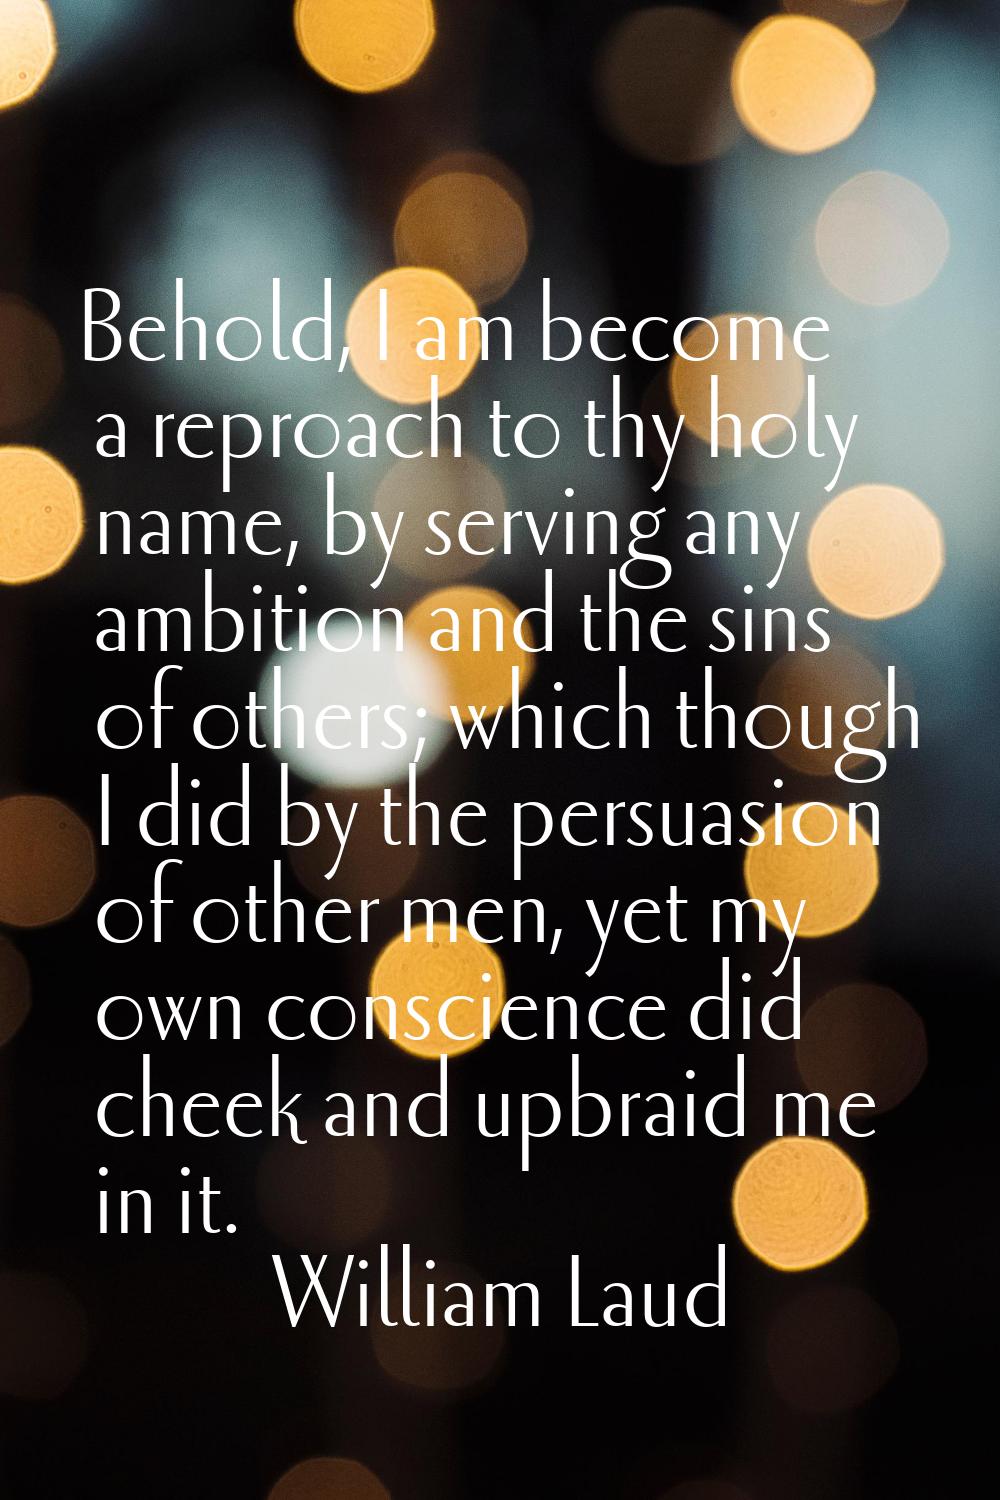 Behold, I am become a reproach to thy holy name, by serving any ambition and the sins of others; wh